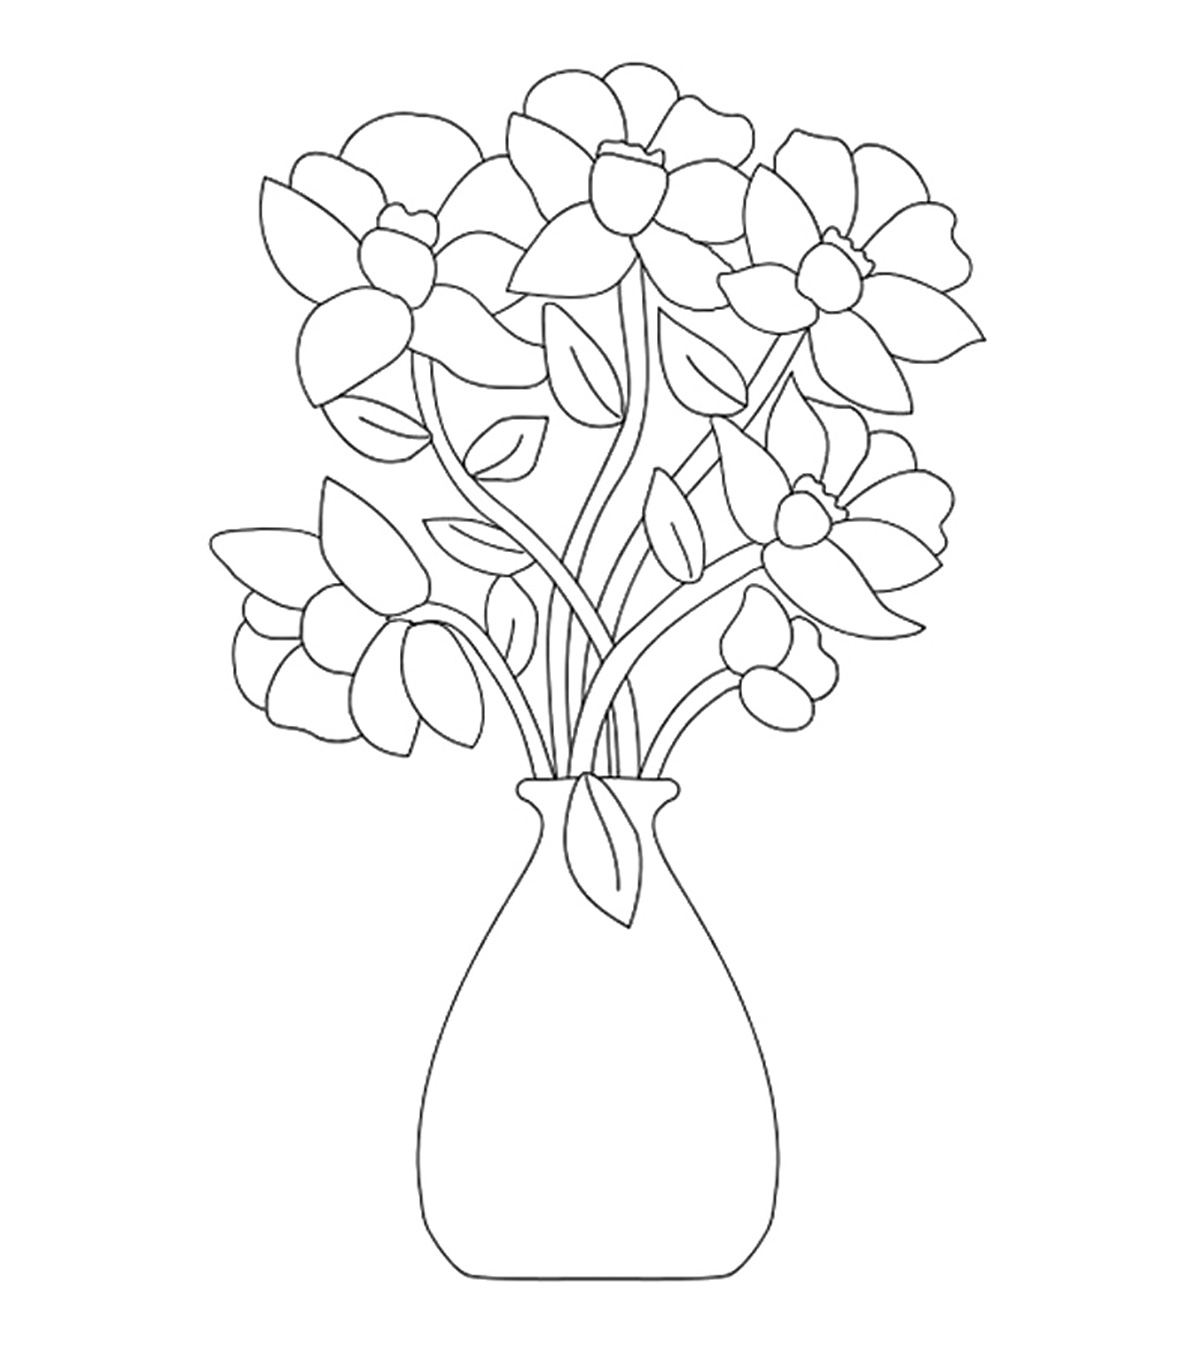 Flowers Coloring Pages - Momjunction